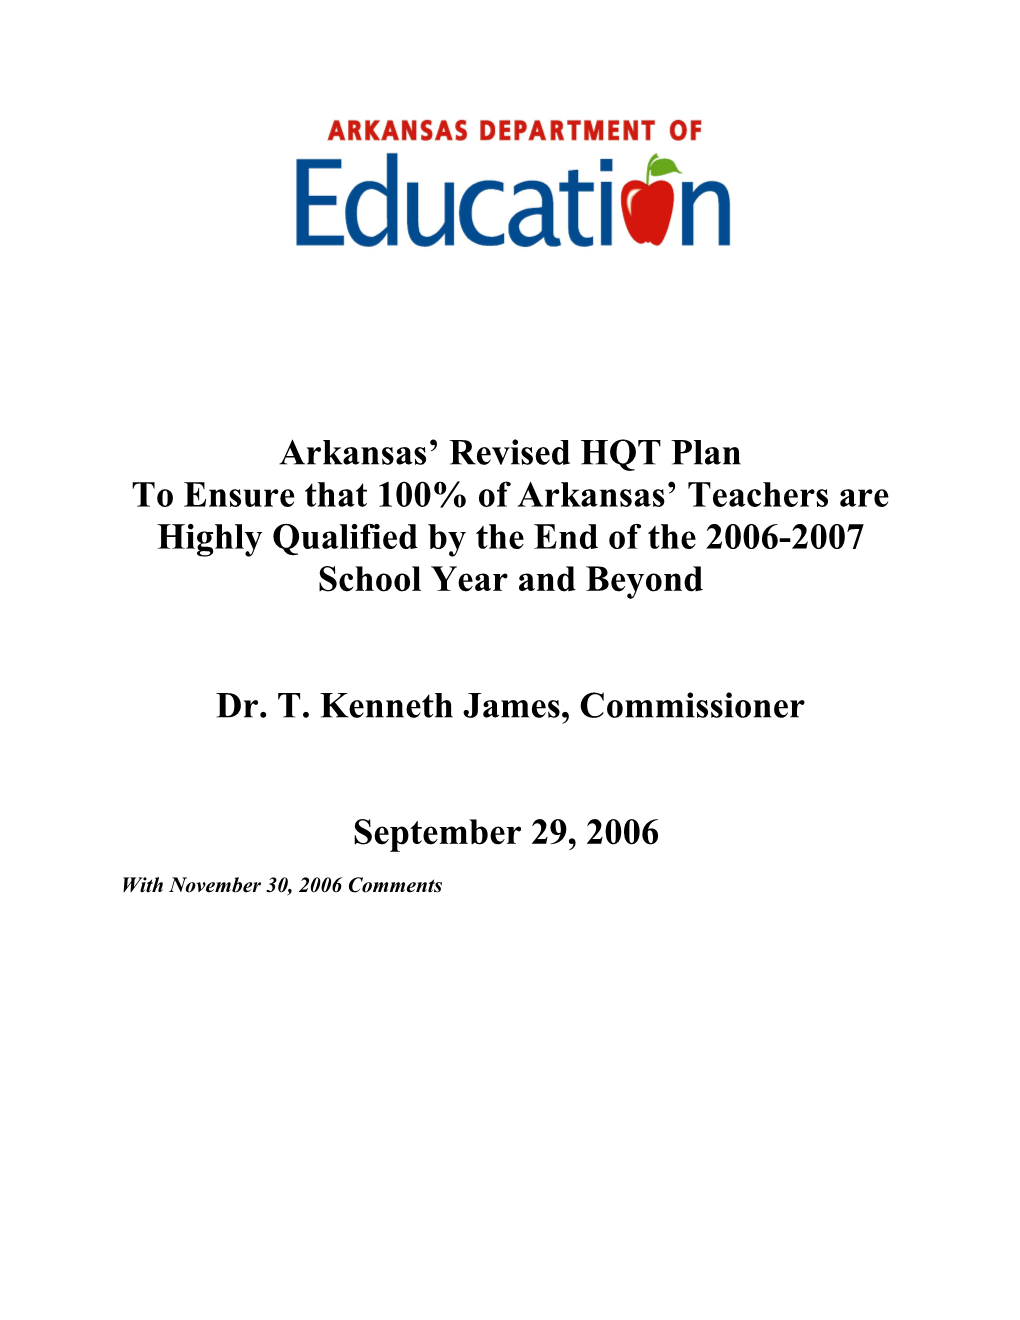 Arkansas - Revised Highly Qualified Teachers State Plan (MS WORD)